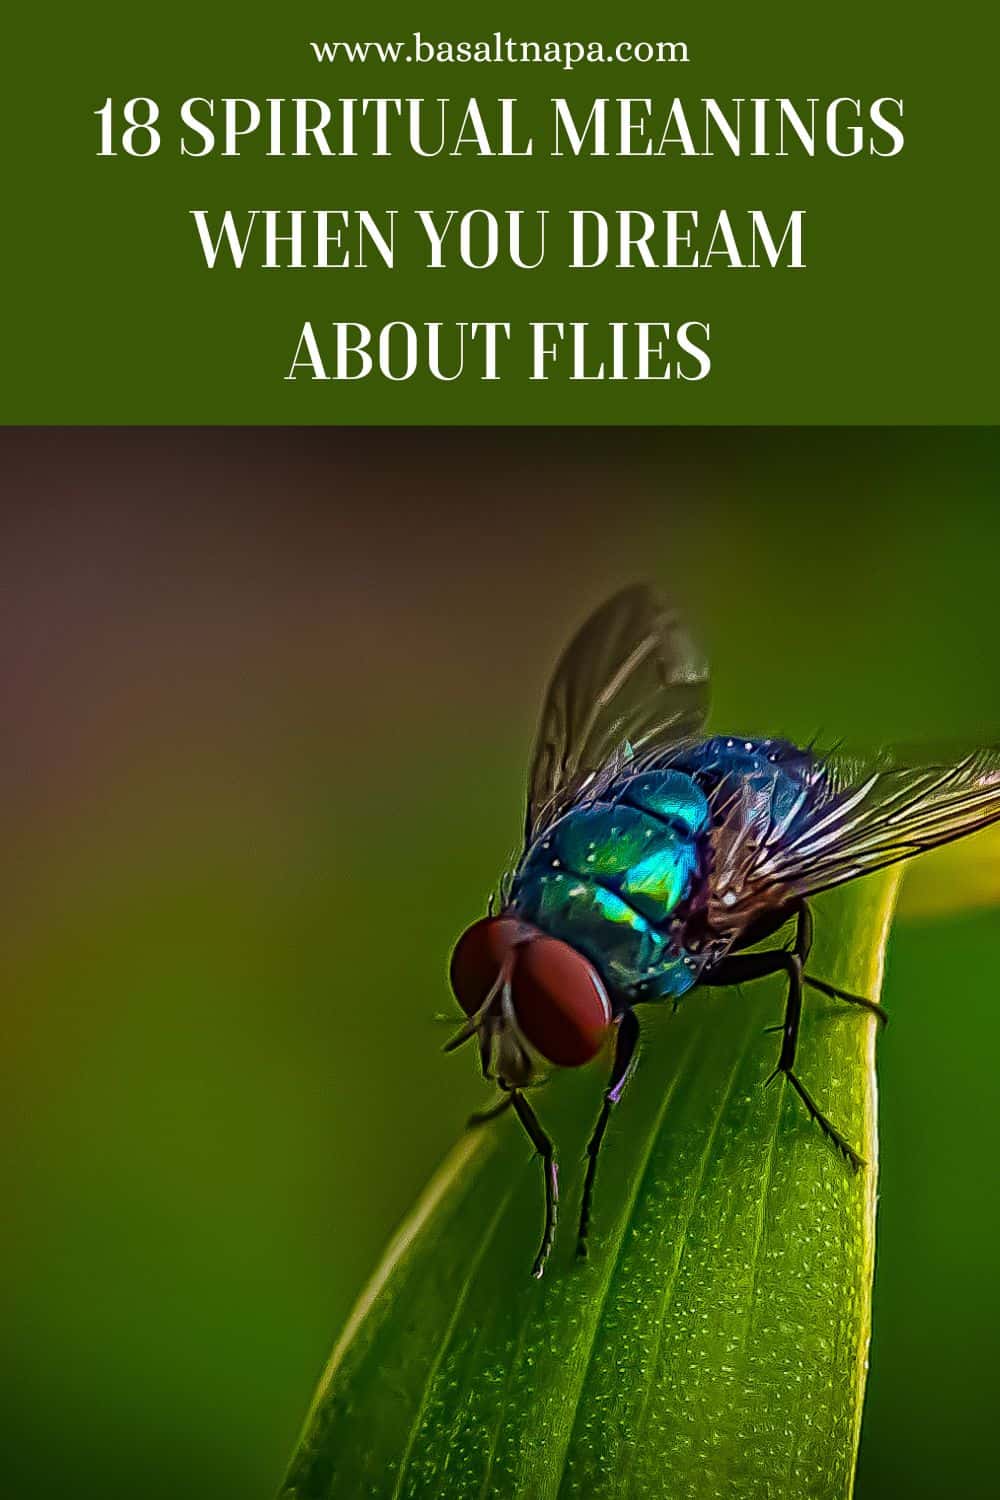 18 Spiritual Meanings When You Dream About Flies